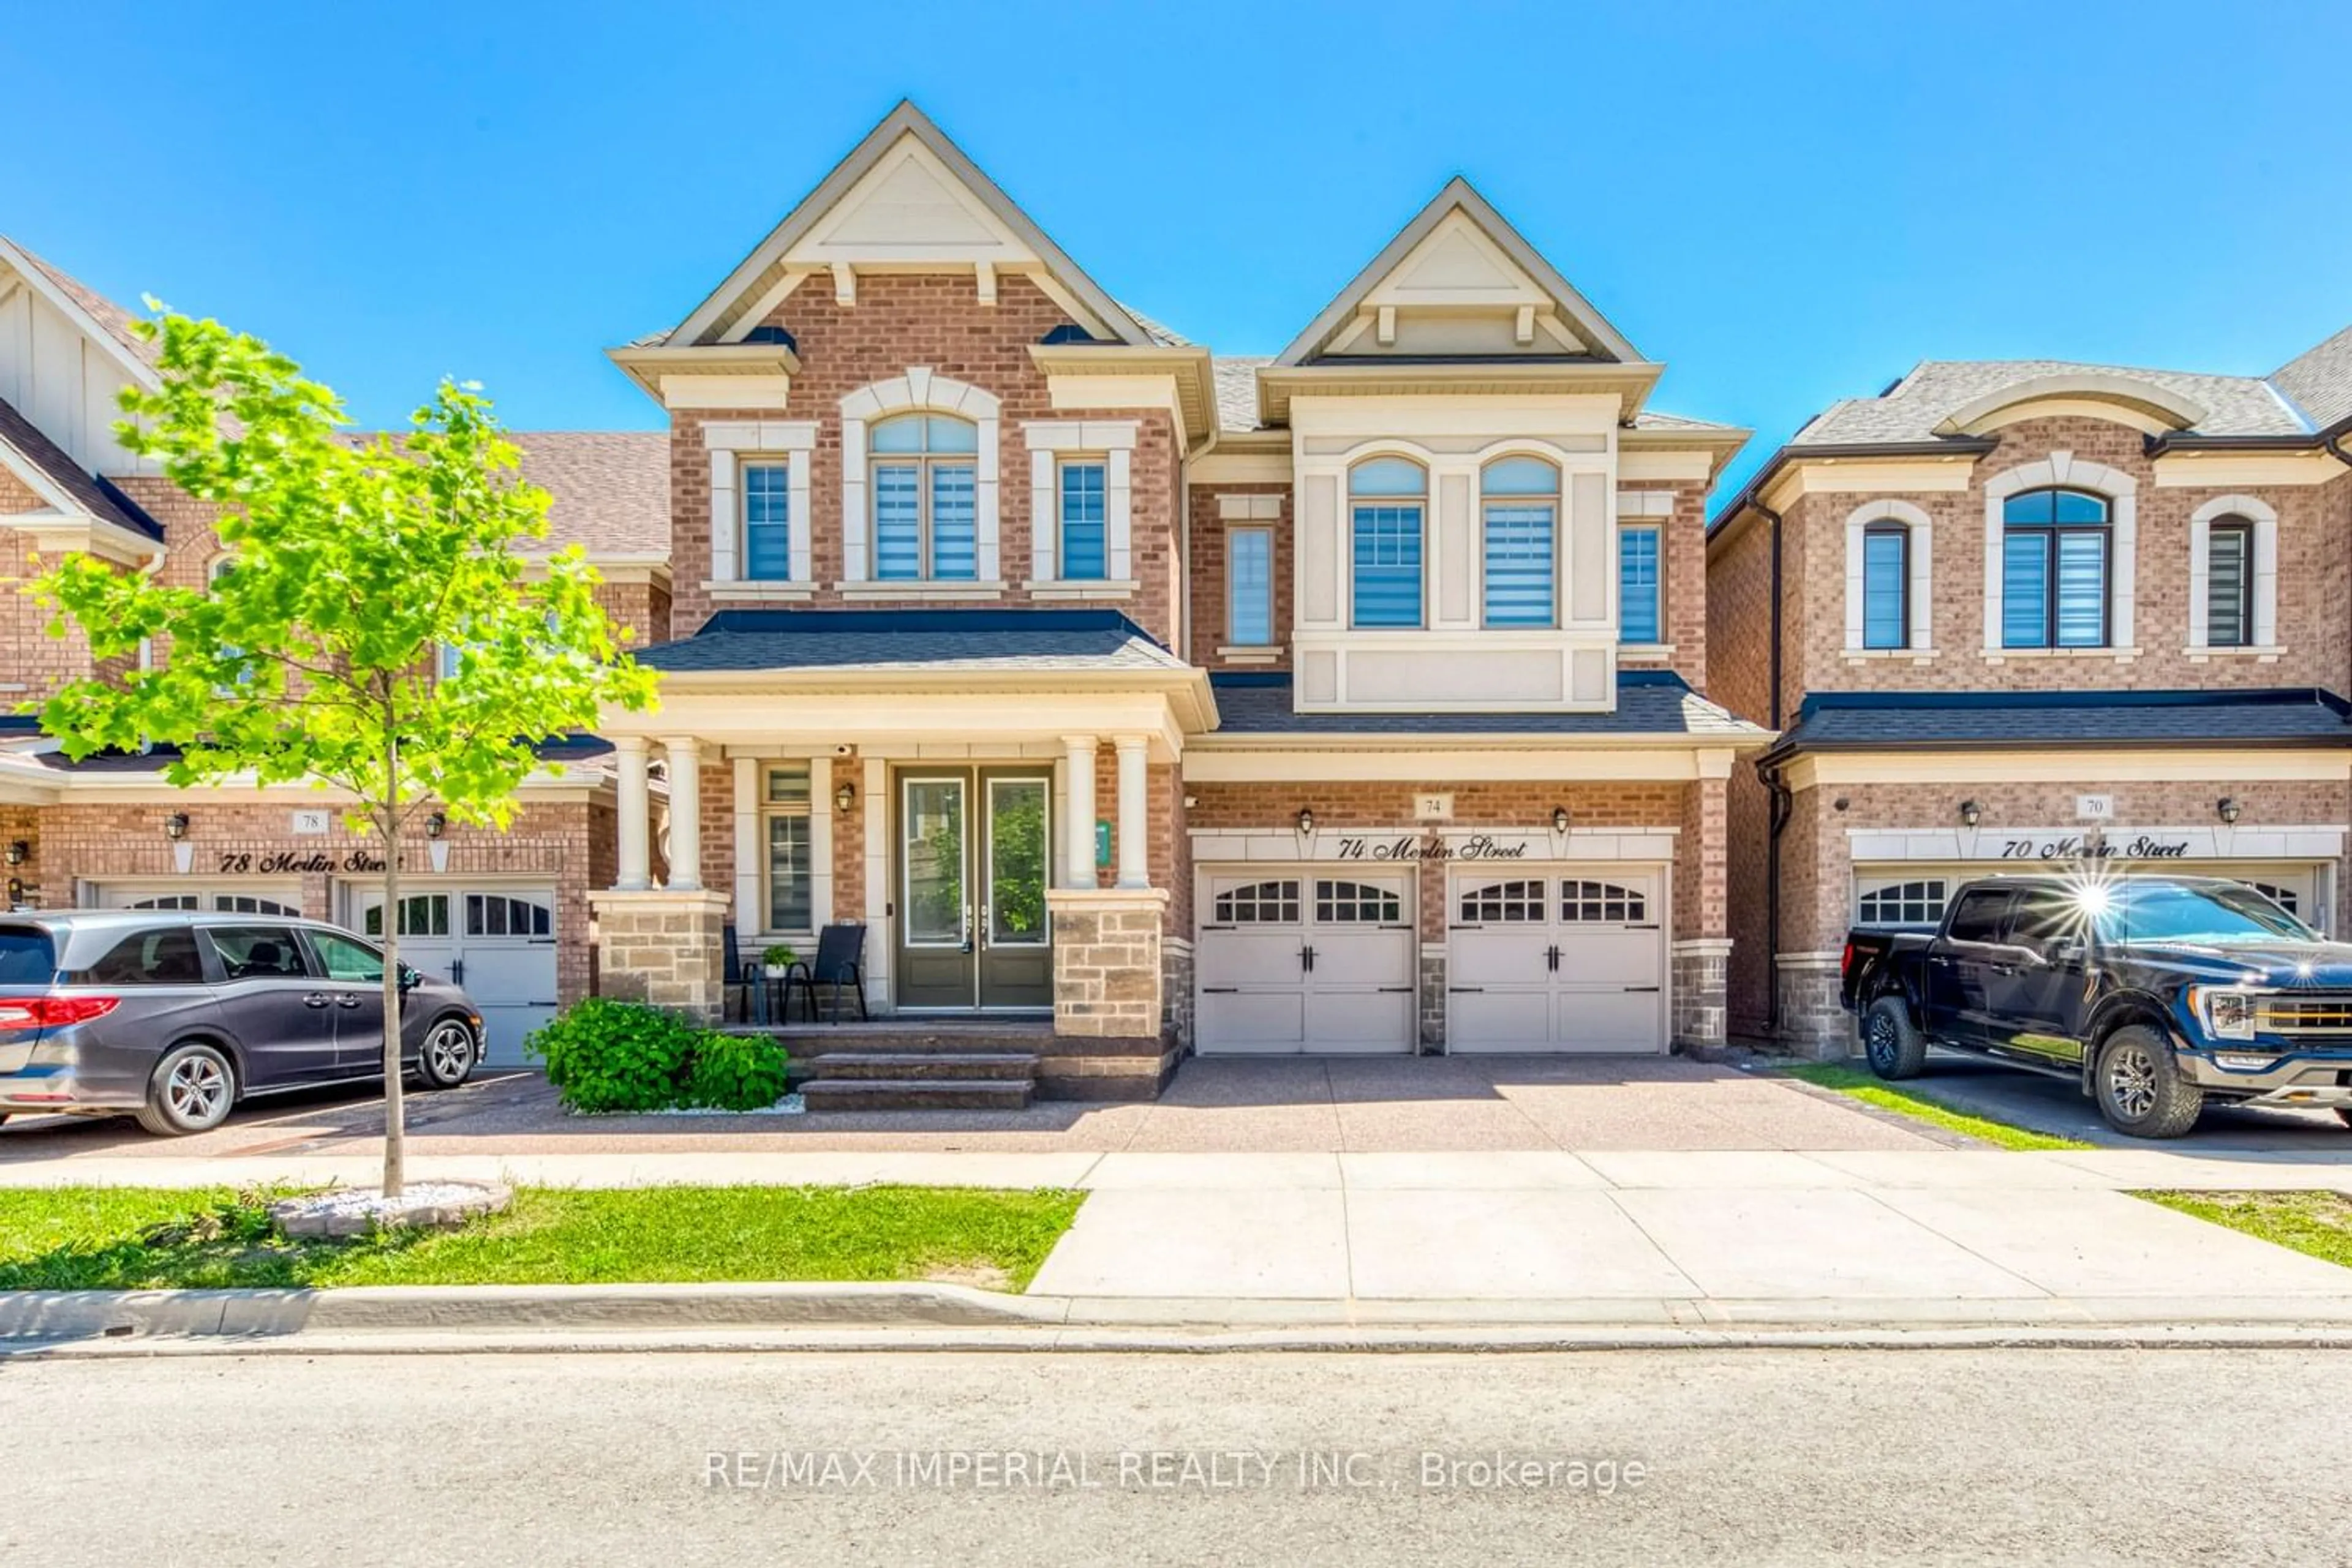 Home with brick exterior material for 74 Merlin St, Oakville Ontario L6H 0Z4